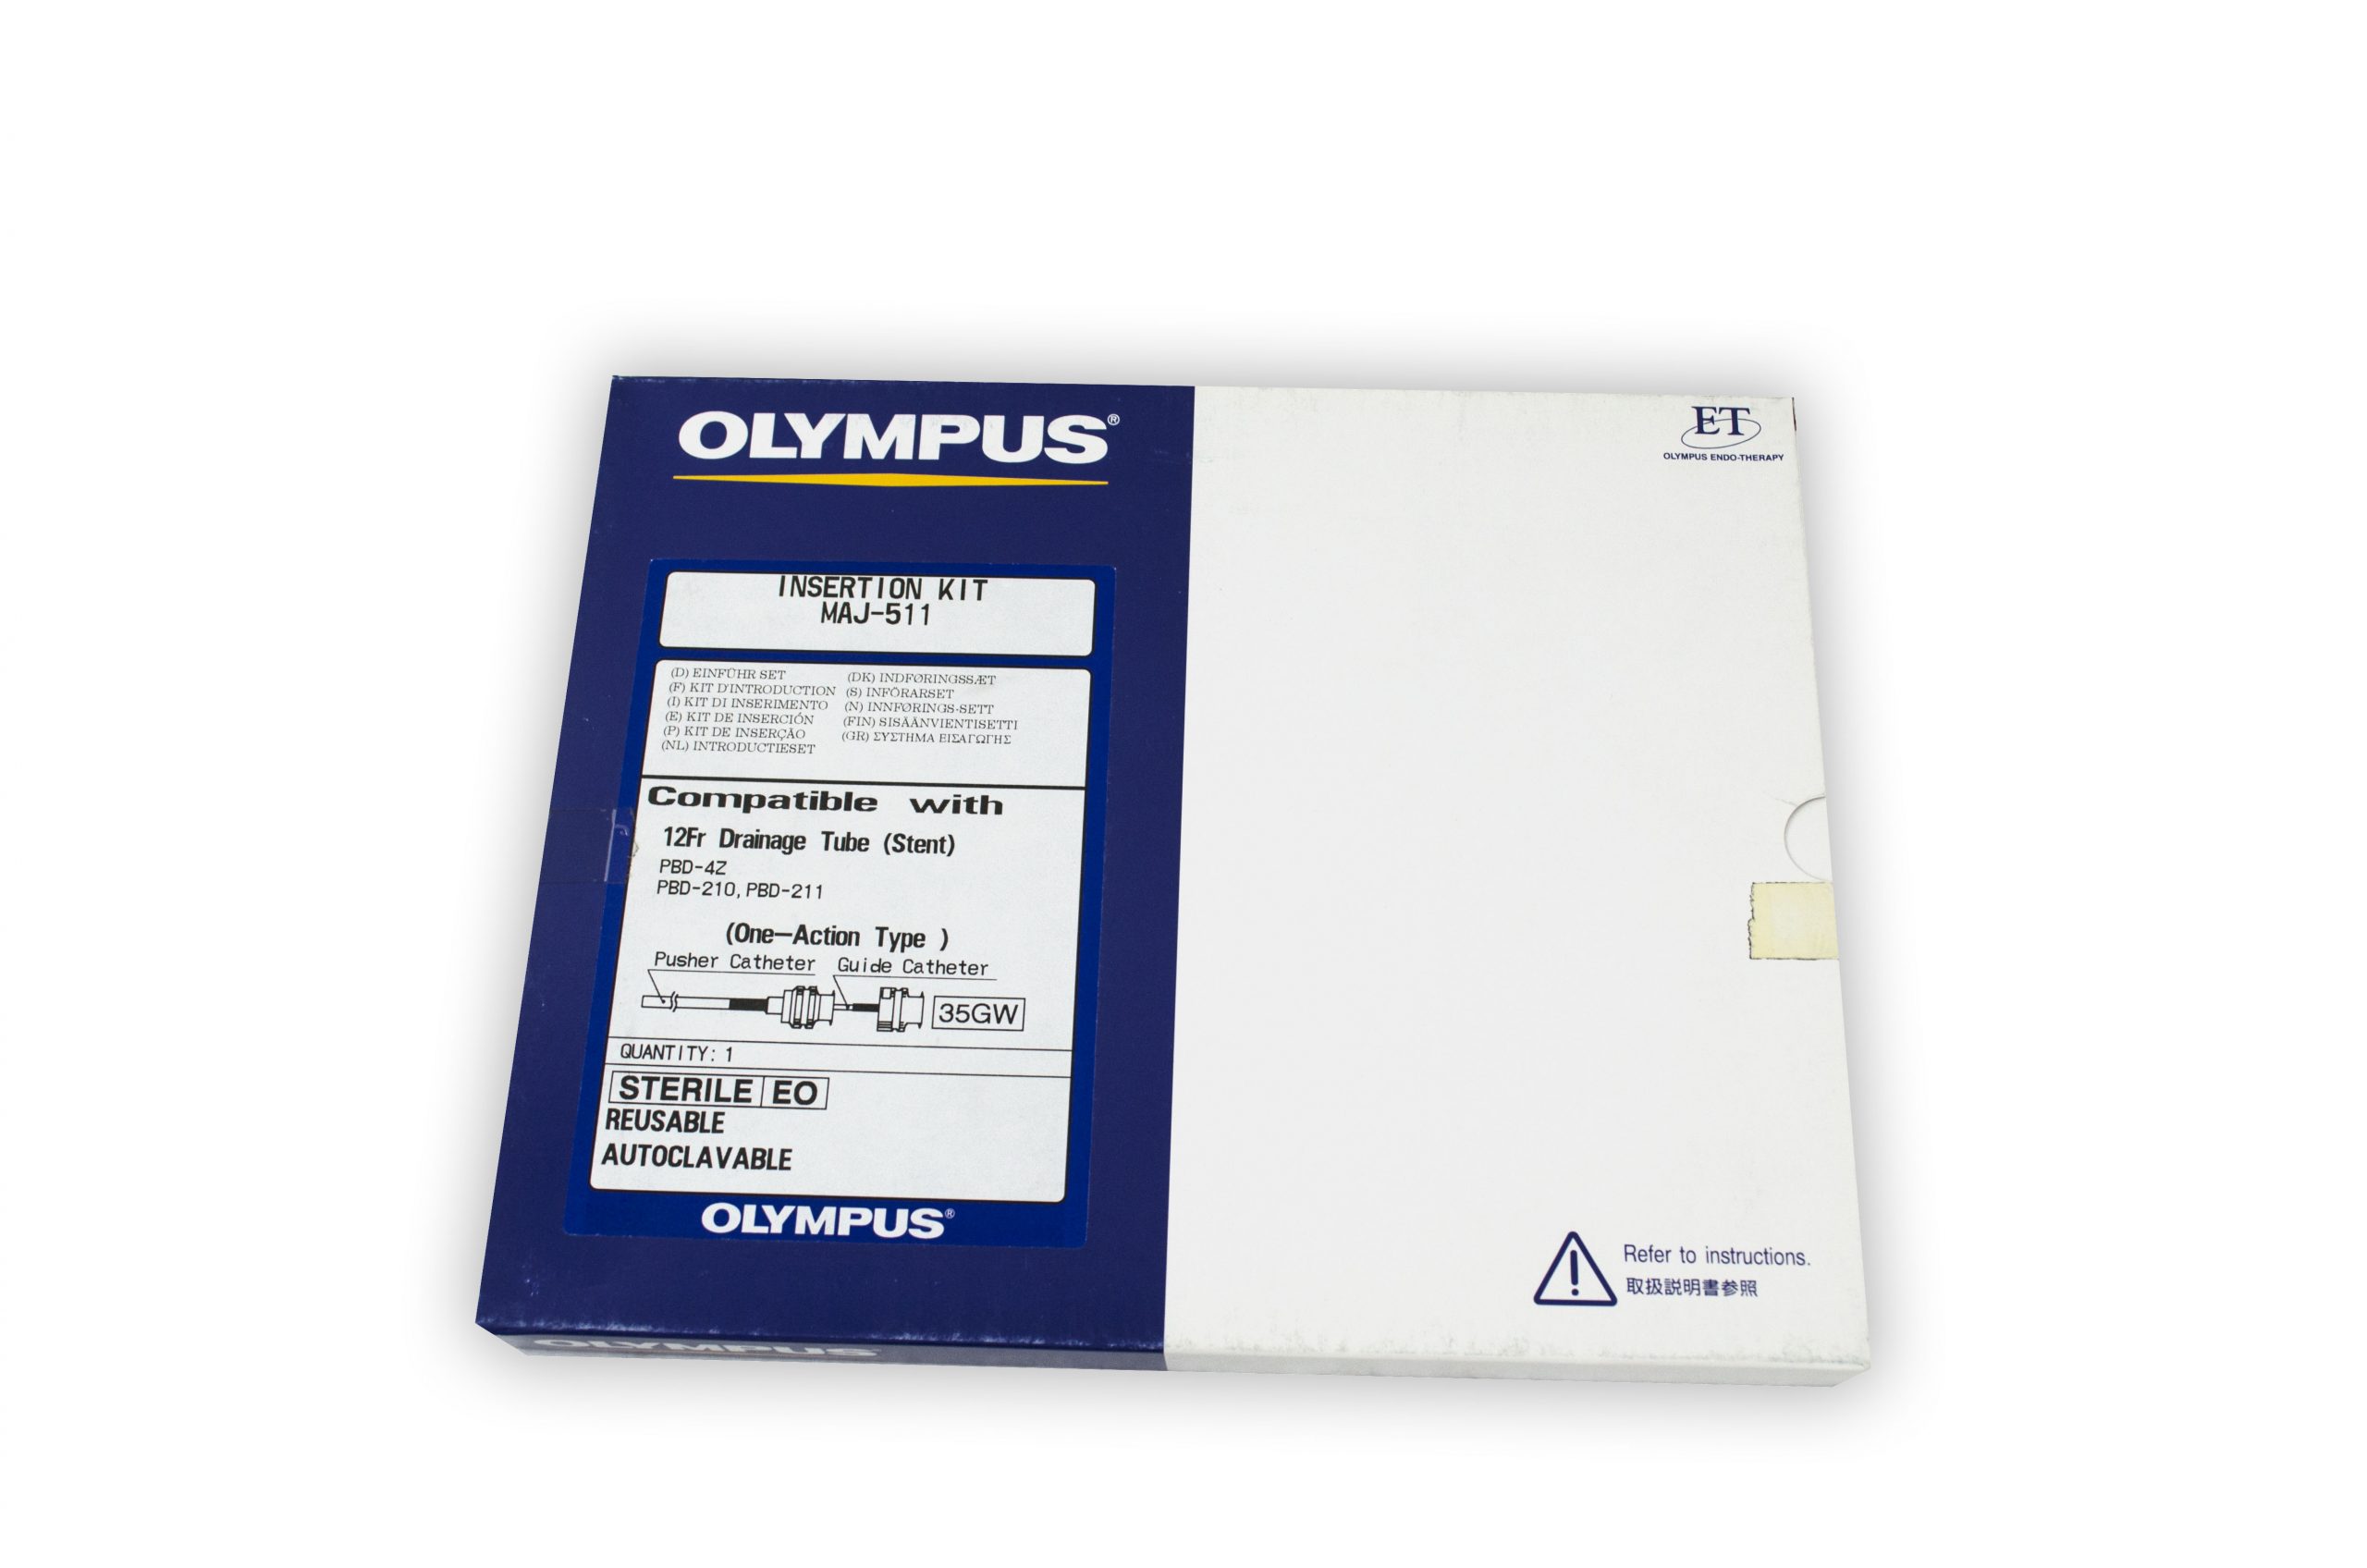 [Out-of-Date] Olympus Disposable Accessory - MAJ-511